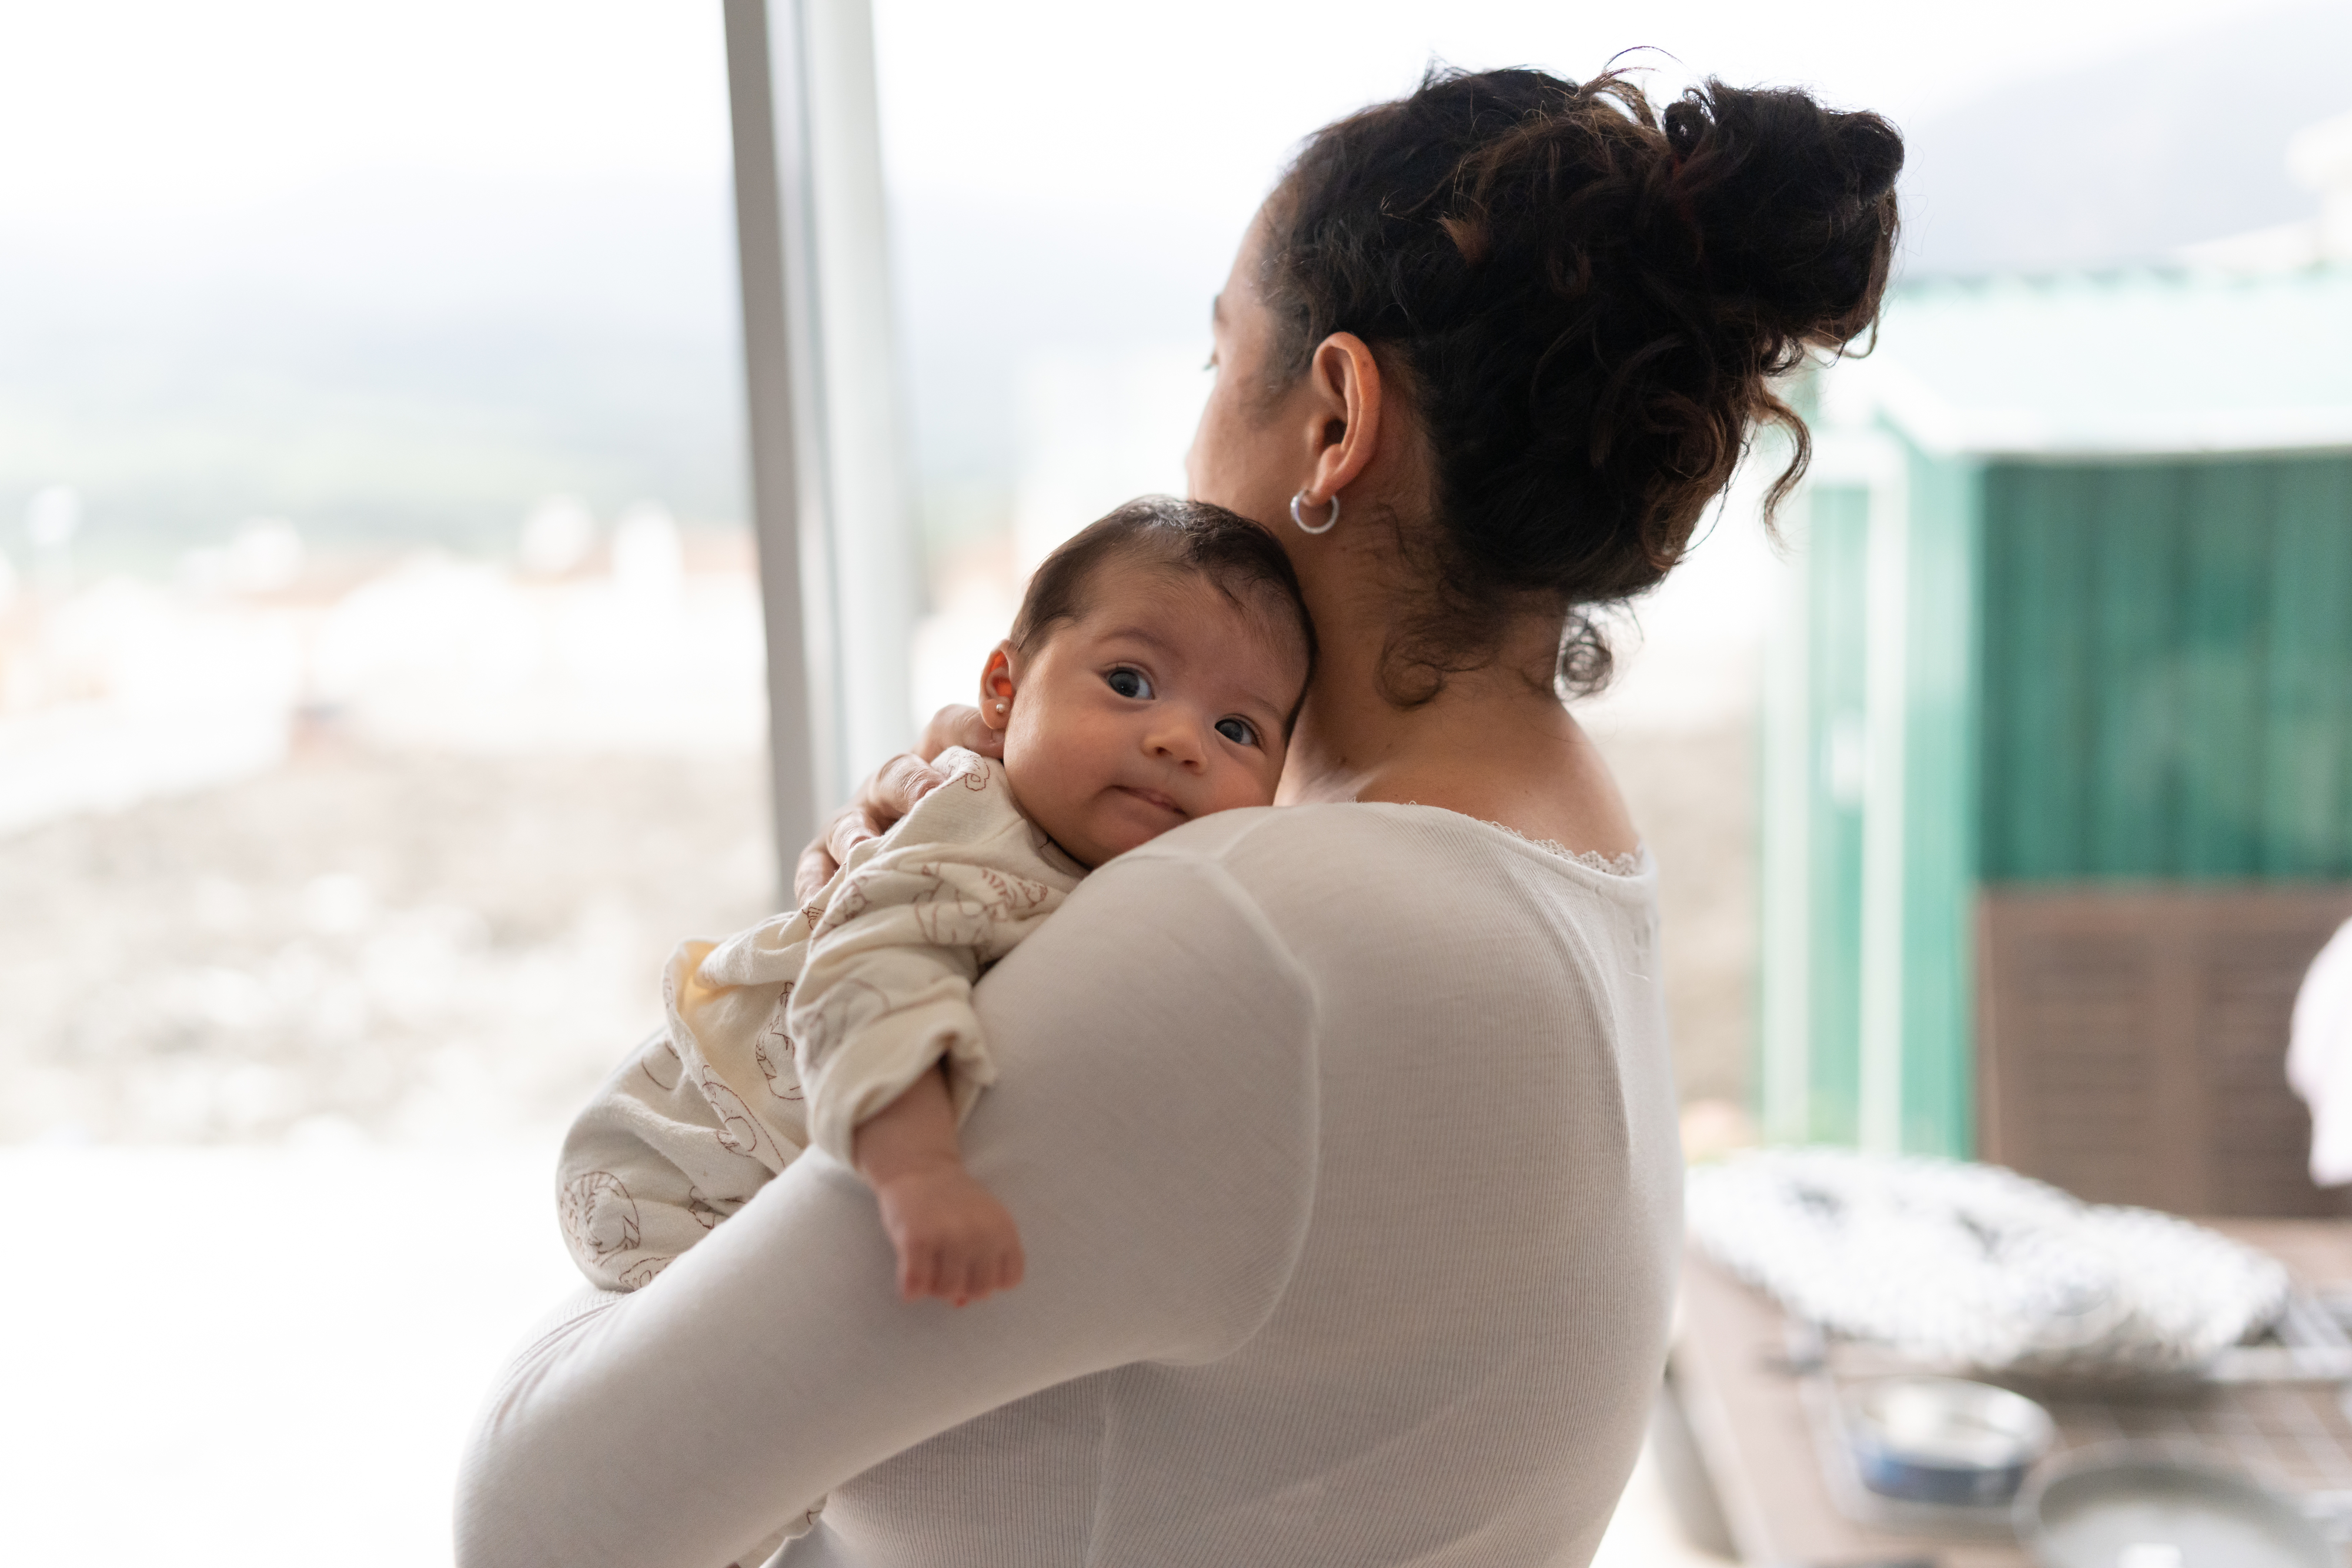 Woman at work holding her baby, facing away from the camera, baby looking over her shoulder